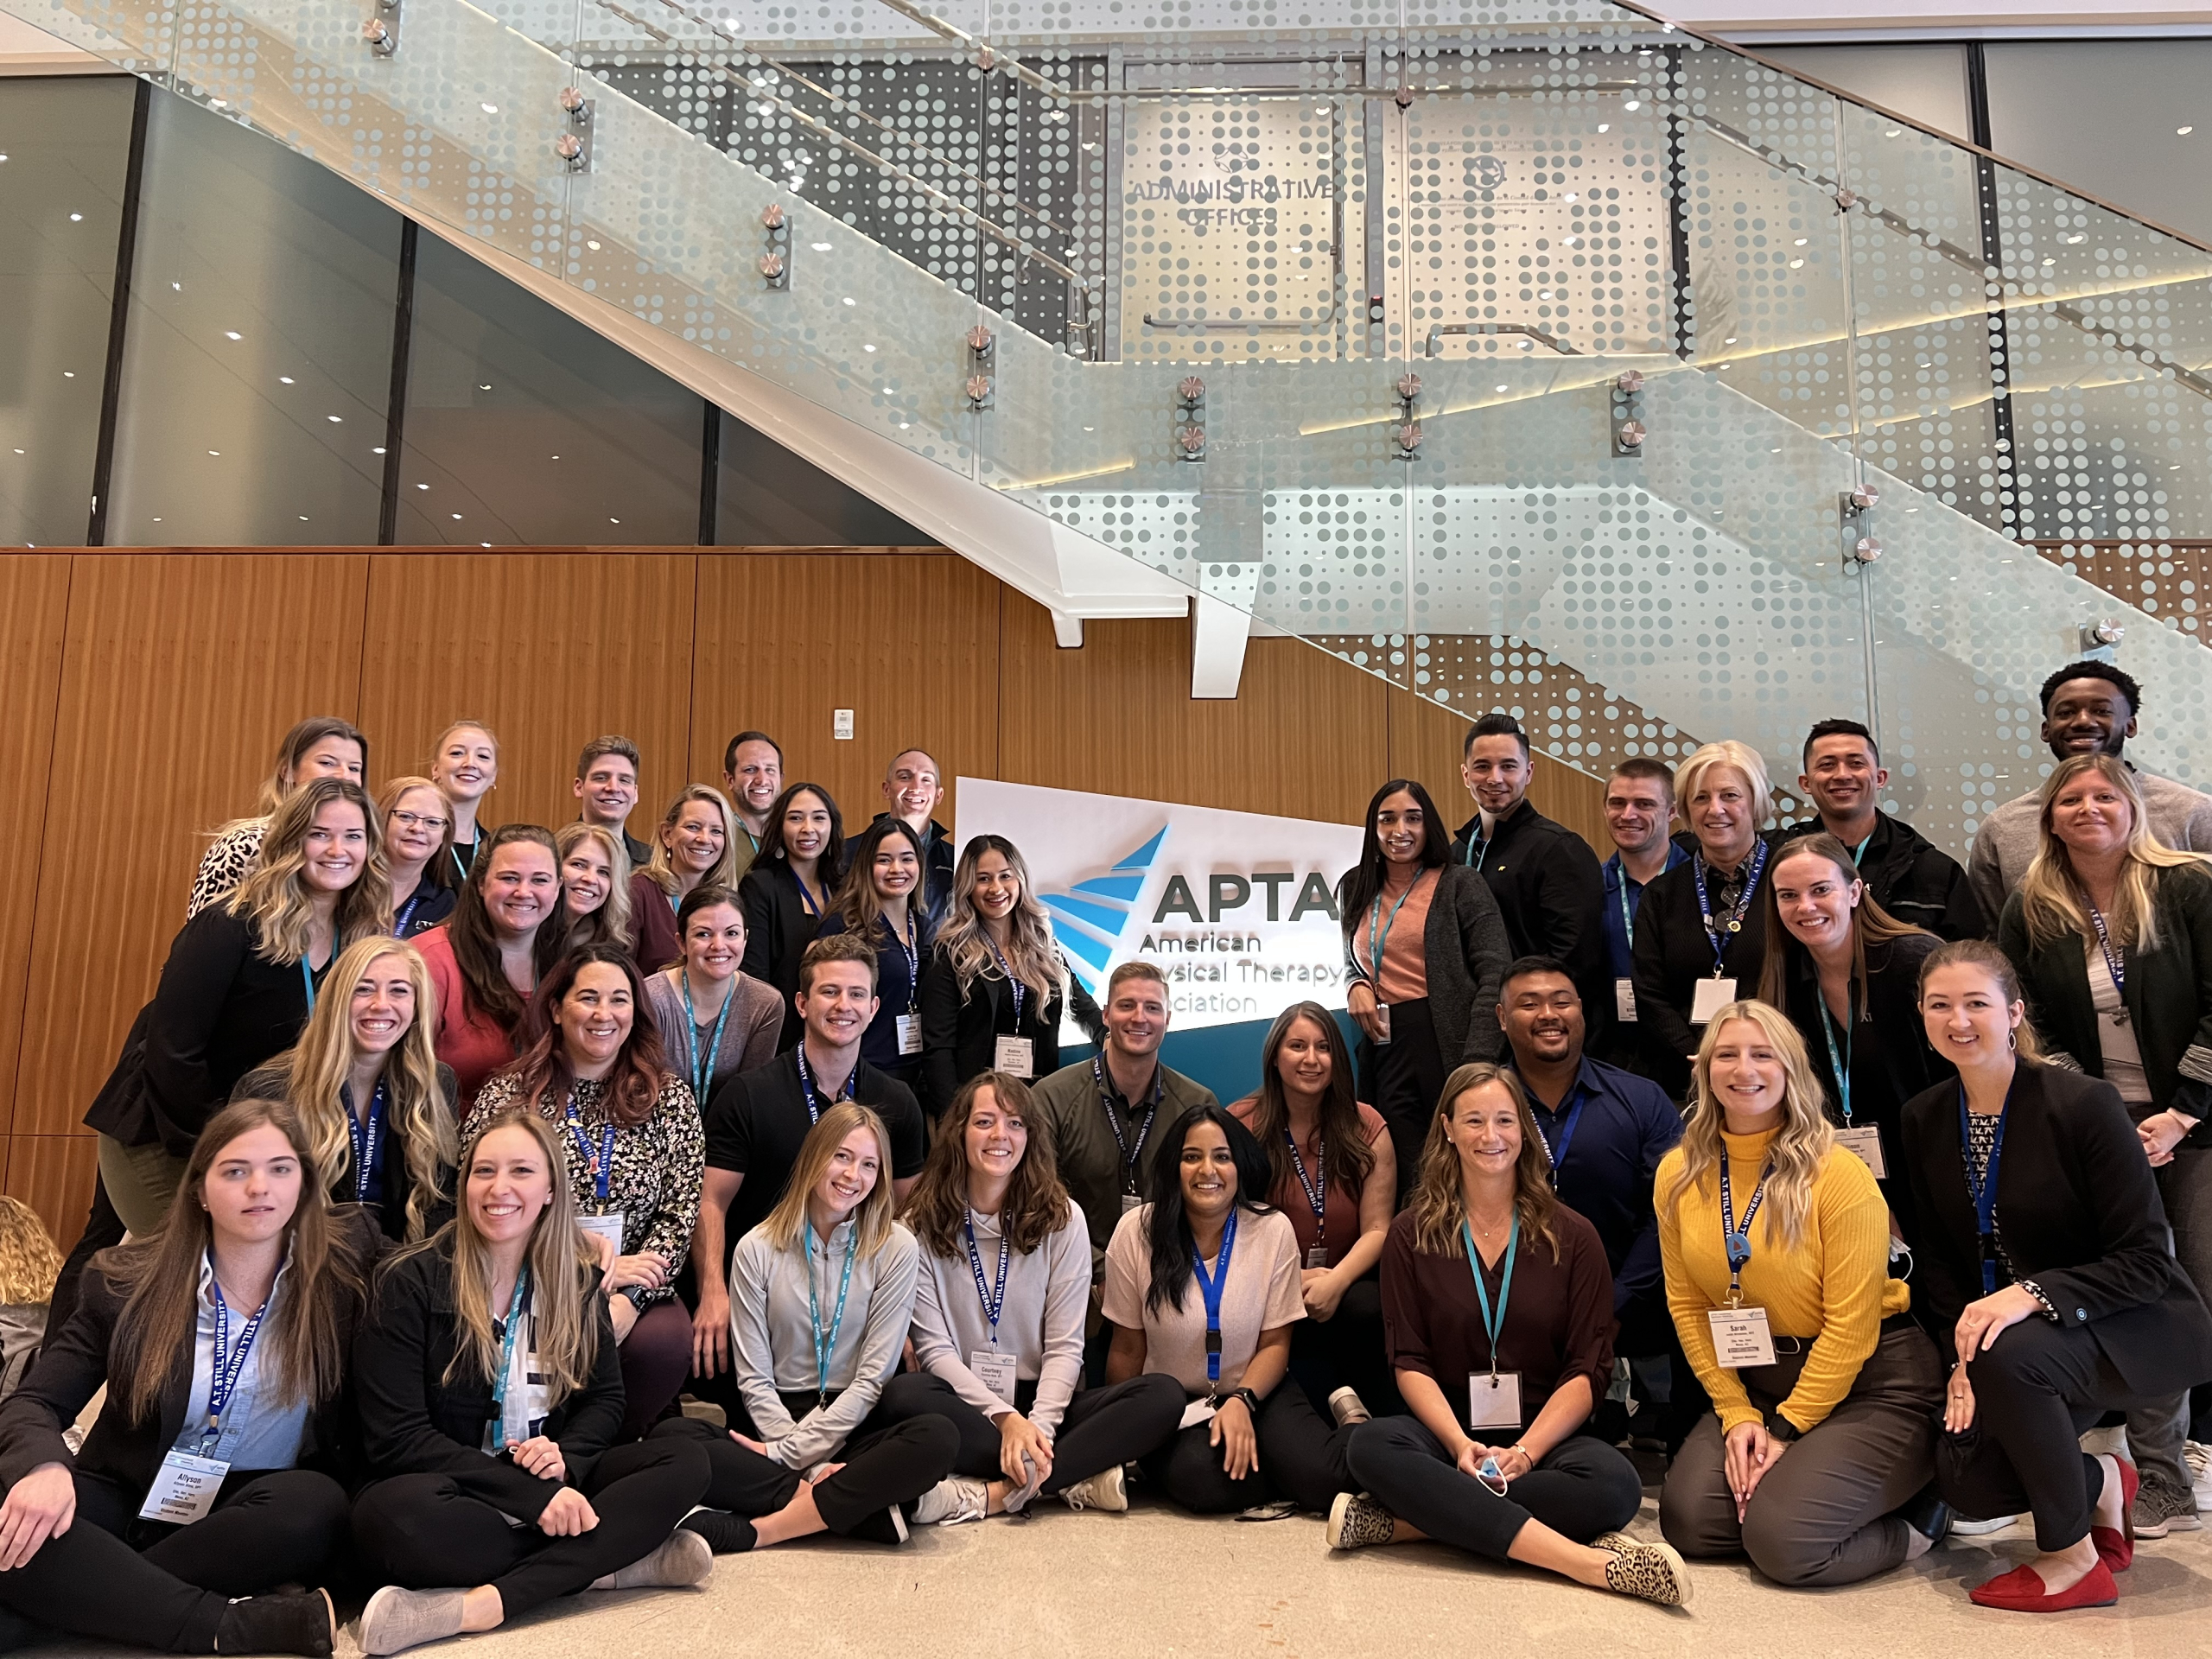 More than 30 faculty members and students from A.T. Still University-Arizona School of Health Sciences’ Physical Therapy program attended the American Physical Therapy Association’s Combined Sections Meeting in San Antonio, Texas, from Feb. 3-5, 2022.